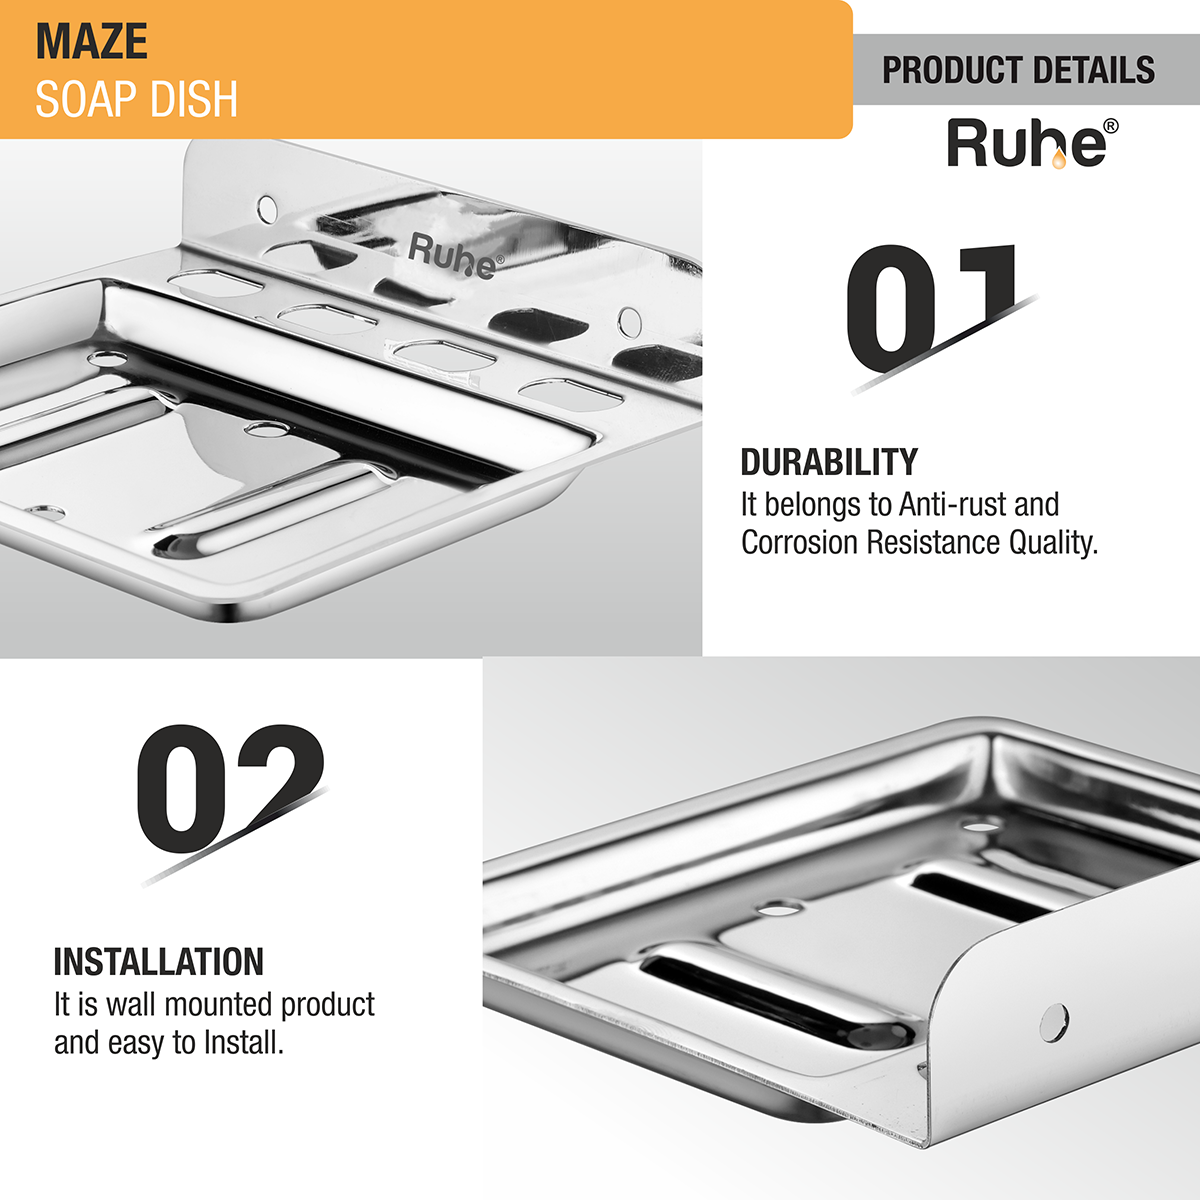 Maze Stainless Steel Soap Dish product details